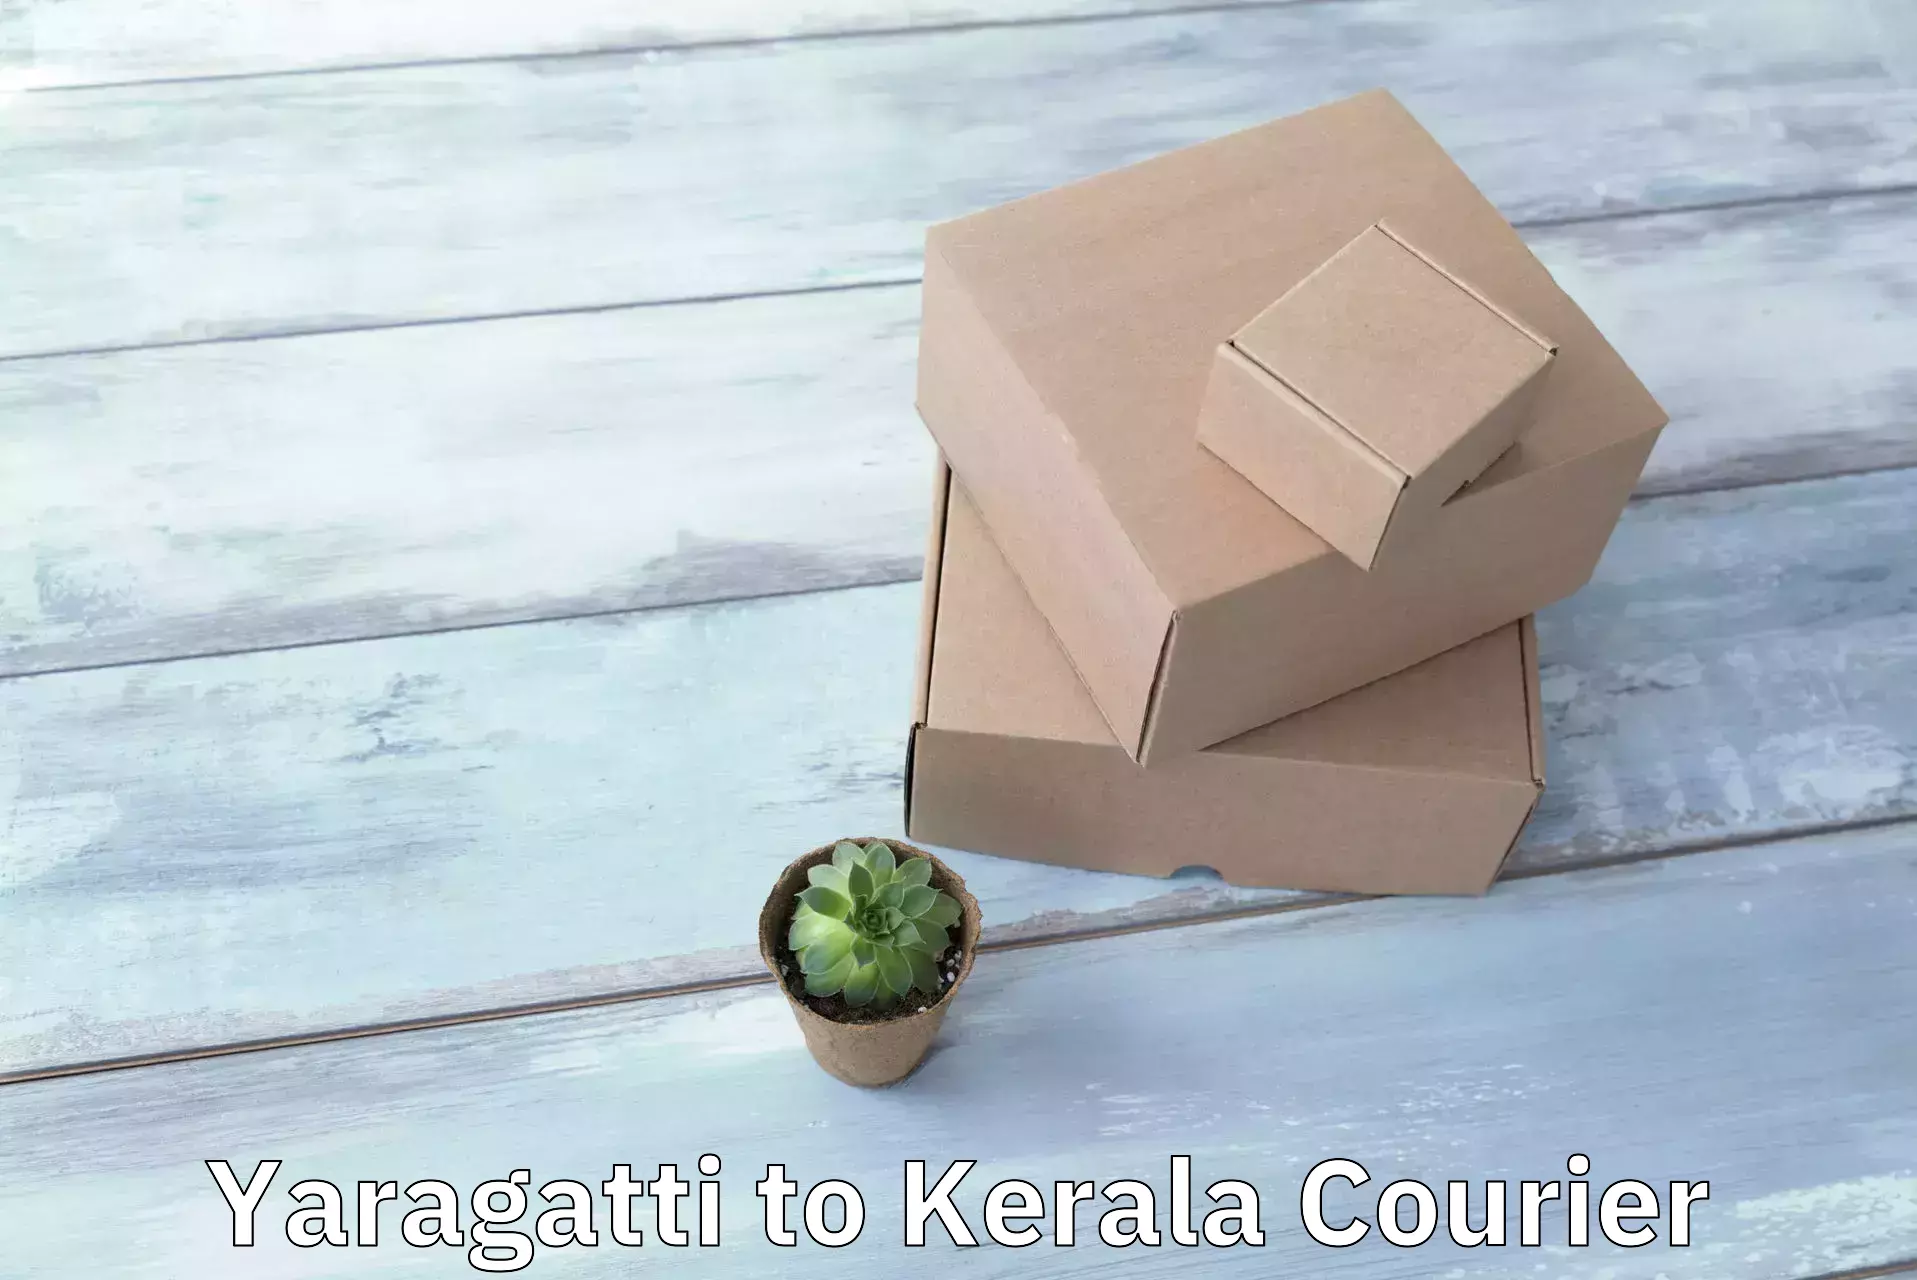 Customized delivery options in Yaragatti to Punalur